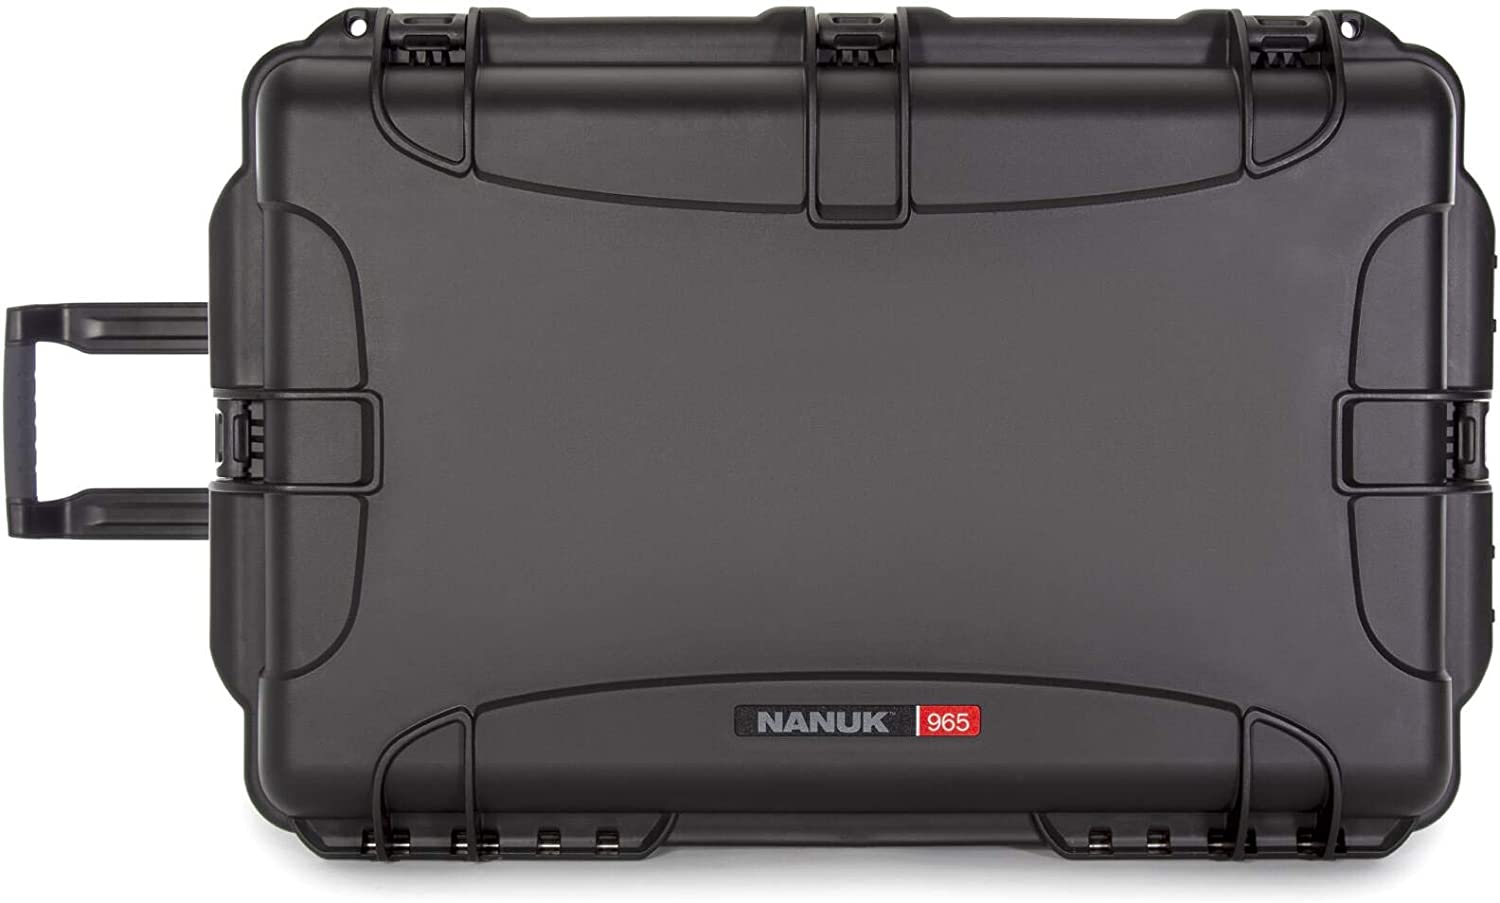 Product Image of Nanuk 965 Waterproof Hard Case with Wheels and Foam Insert - Black